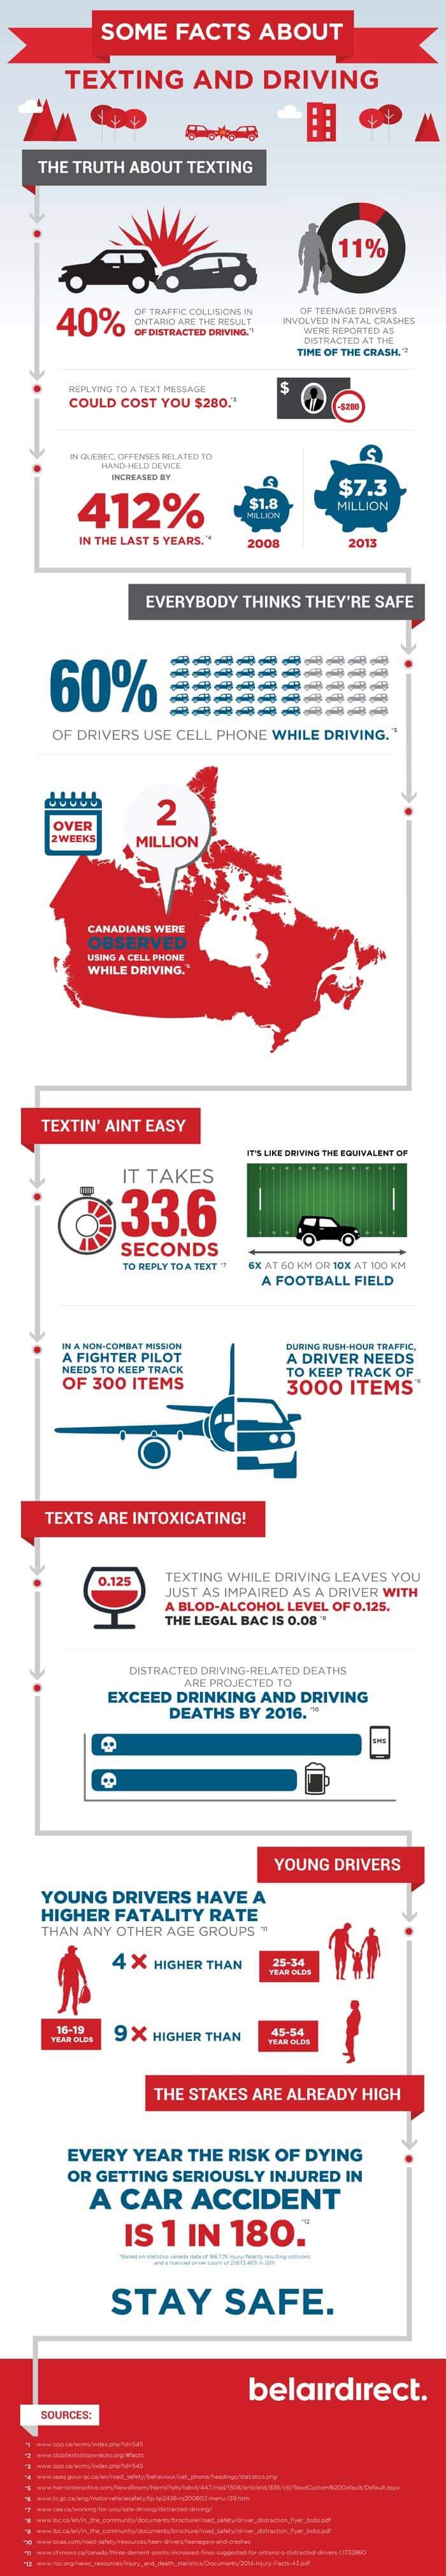 "Some Facts About Texting and Driving" infographic